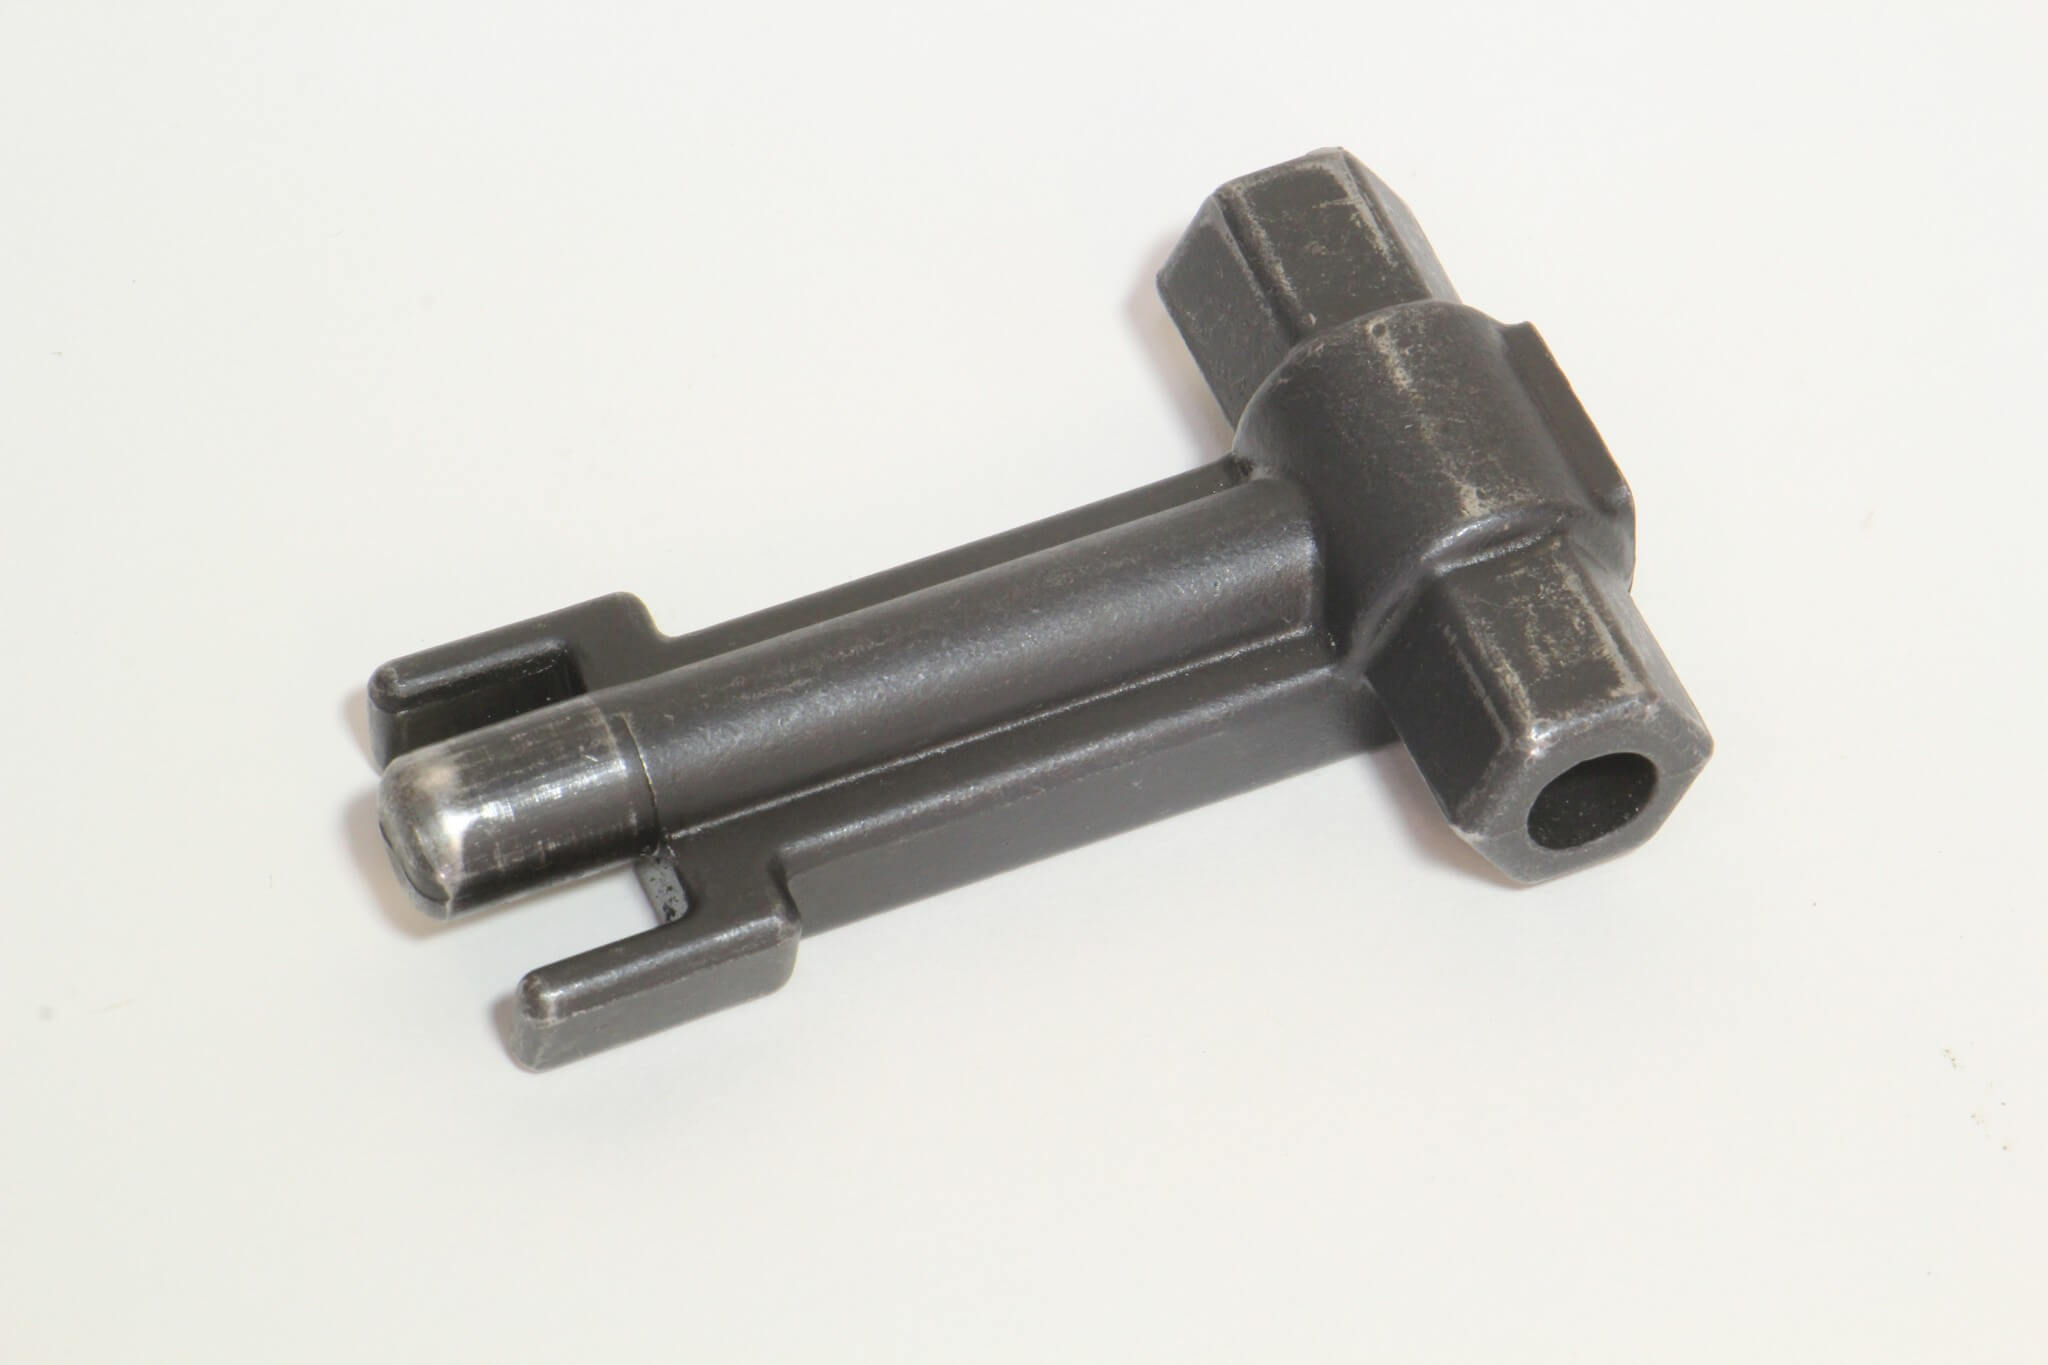 9. A special Kent Moore (PNJ11639) injector-extracting tool was used to correctly unseat the injectors from their bores. This tool will eliminate damaging the injector during removal. 